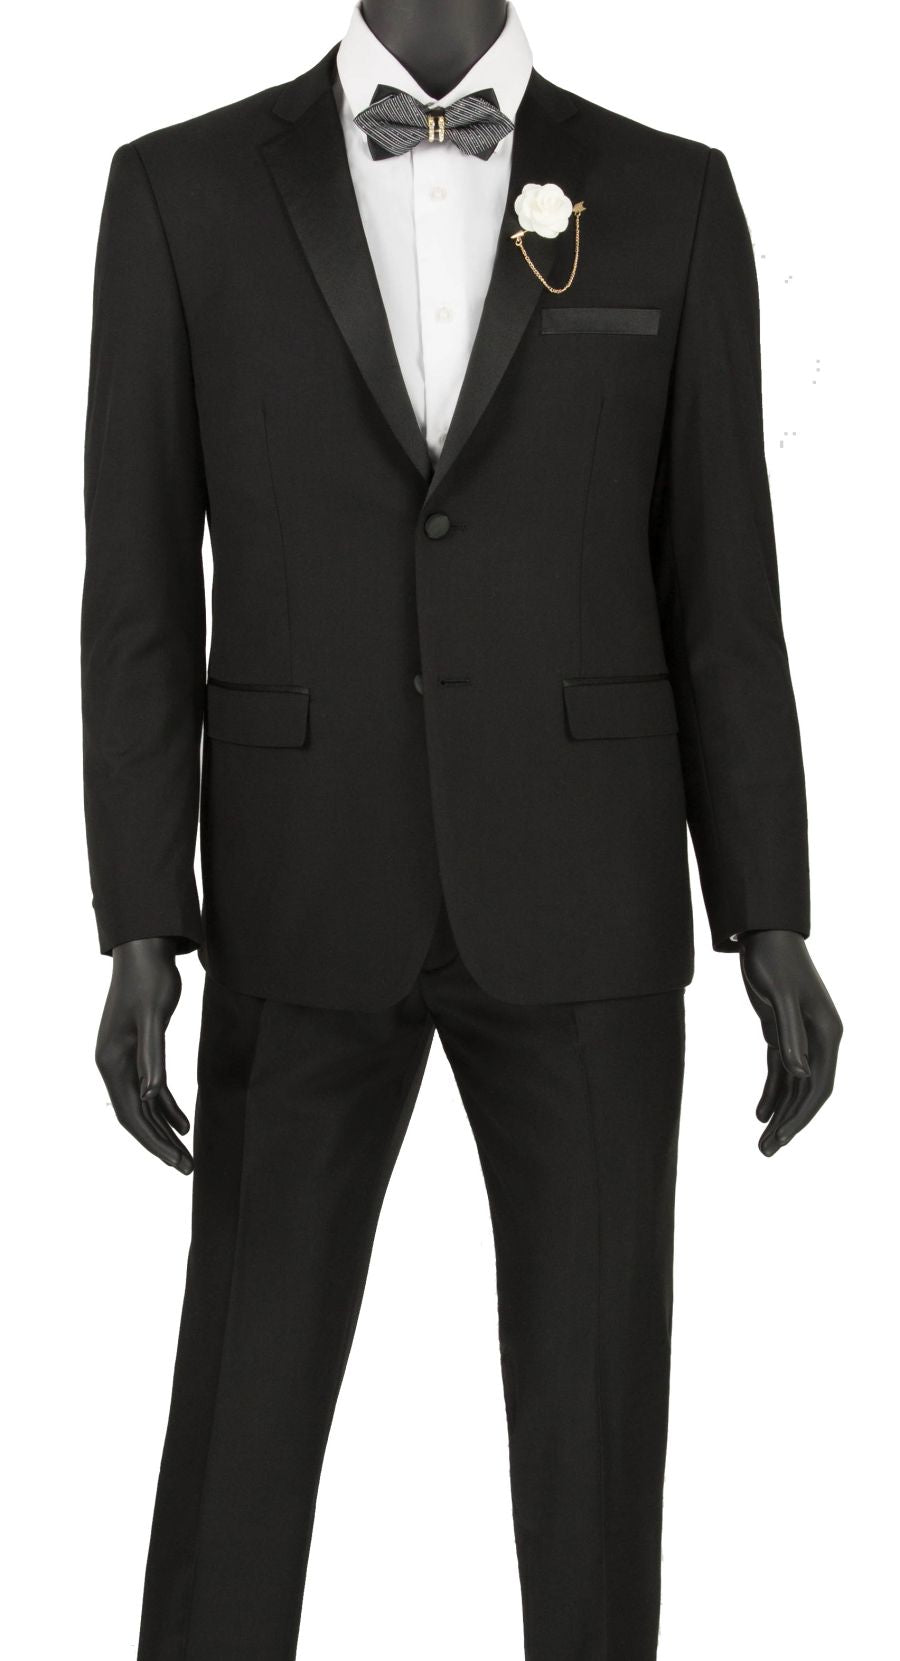 Men Tuxedos | Church suits for less